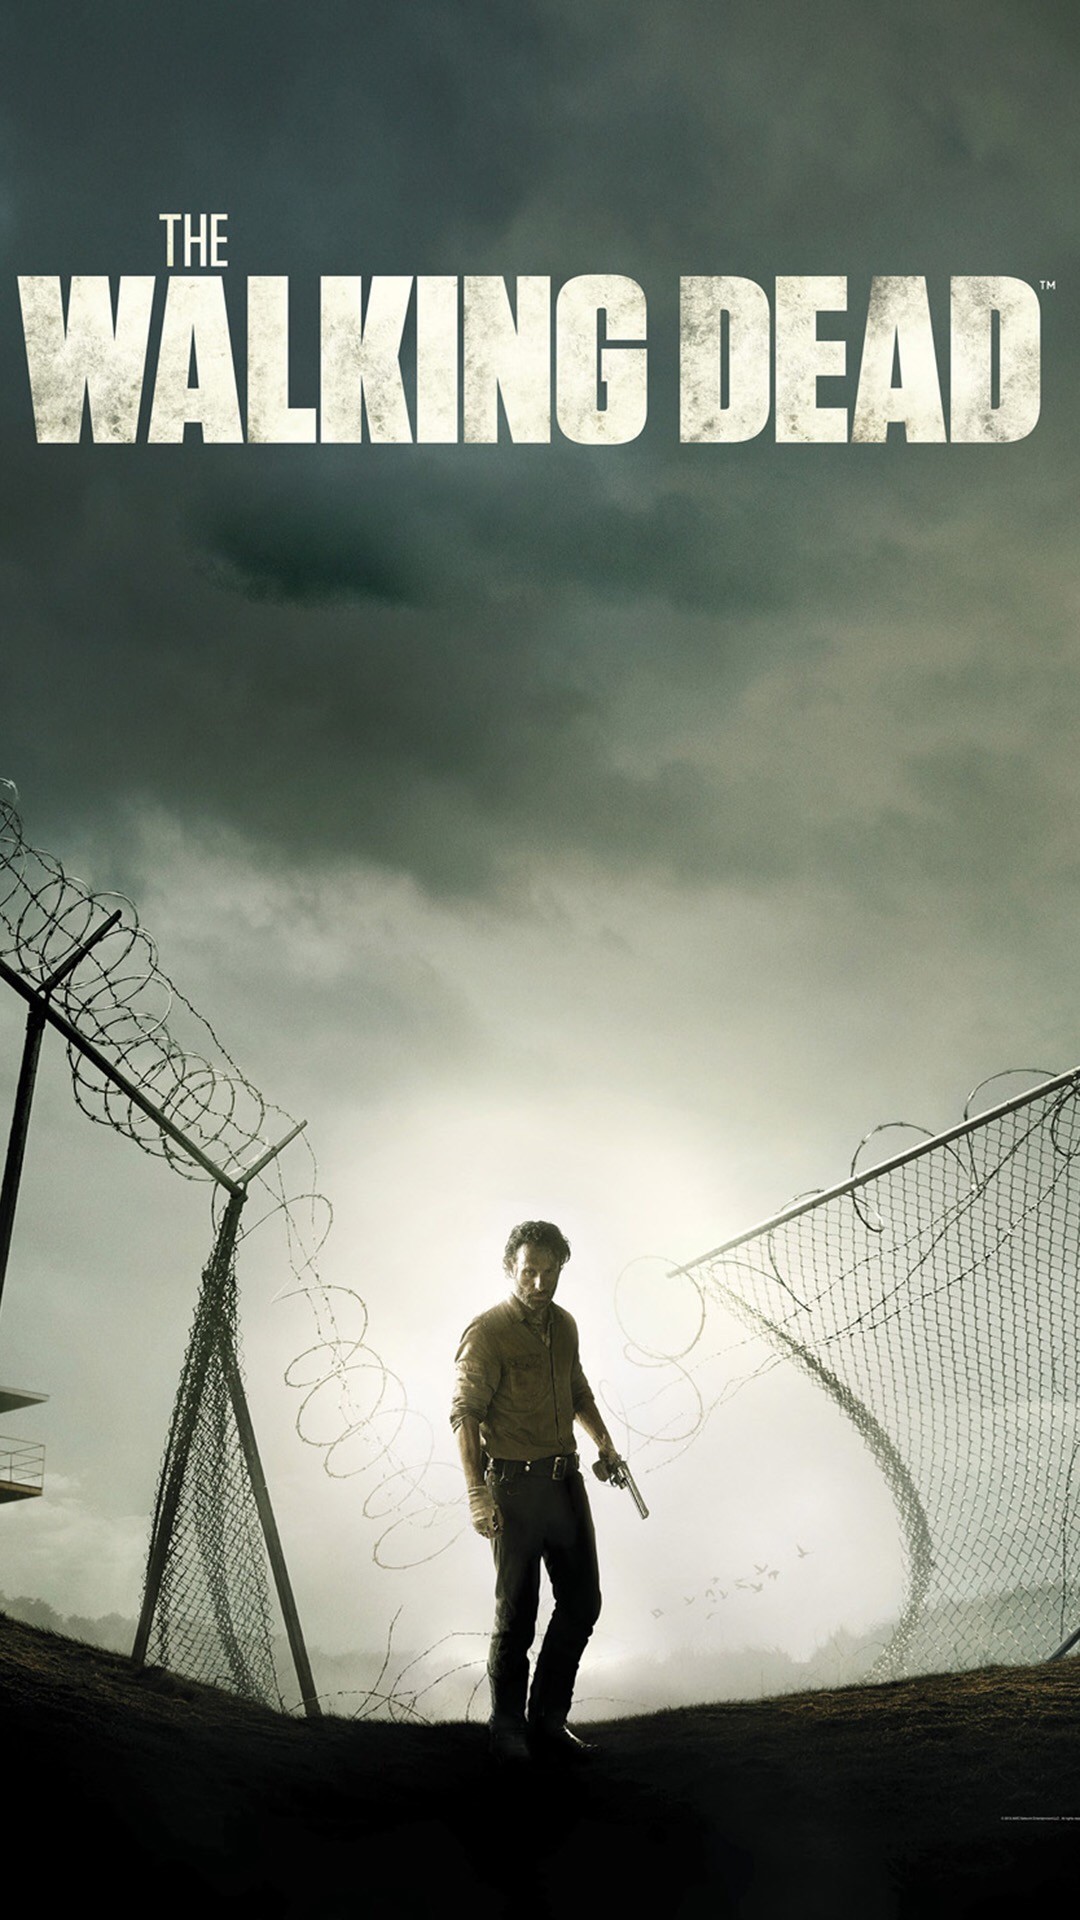 The Walking Dead wallpaper ·① Download free stunning backgrounds for